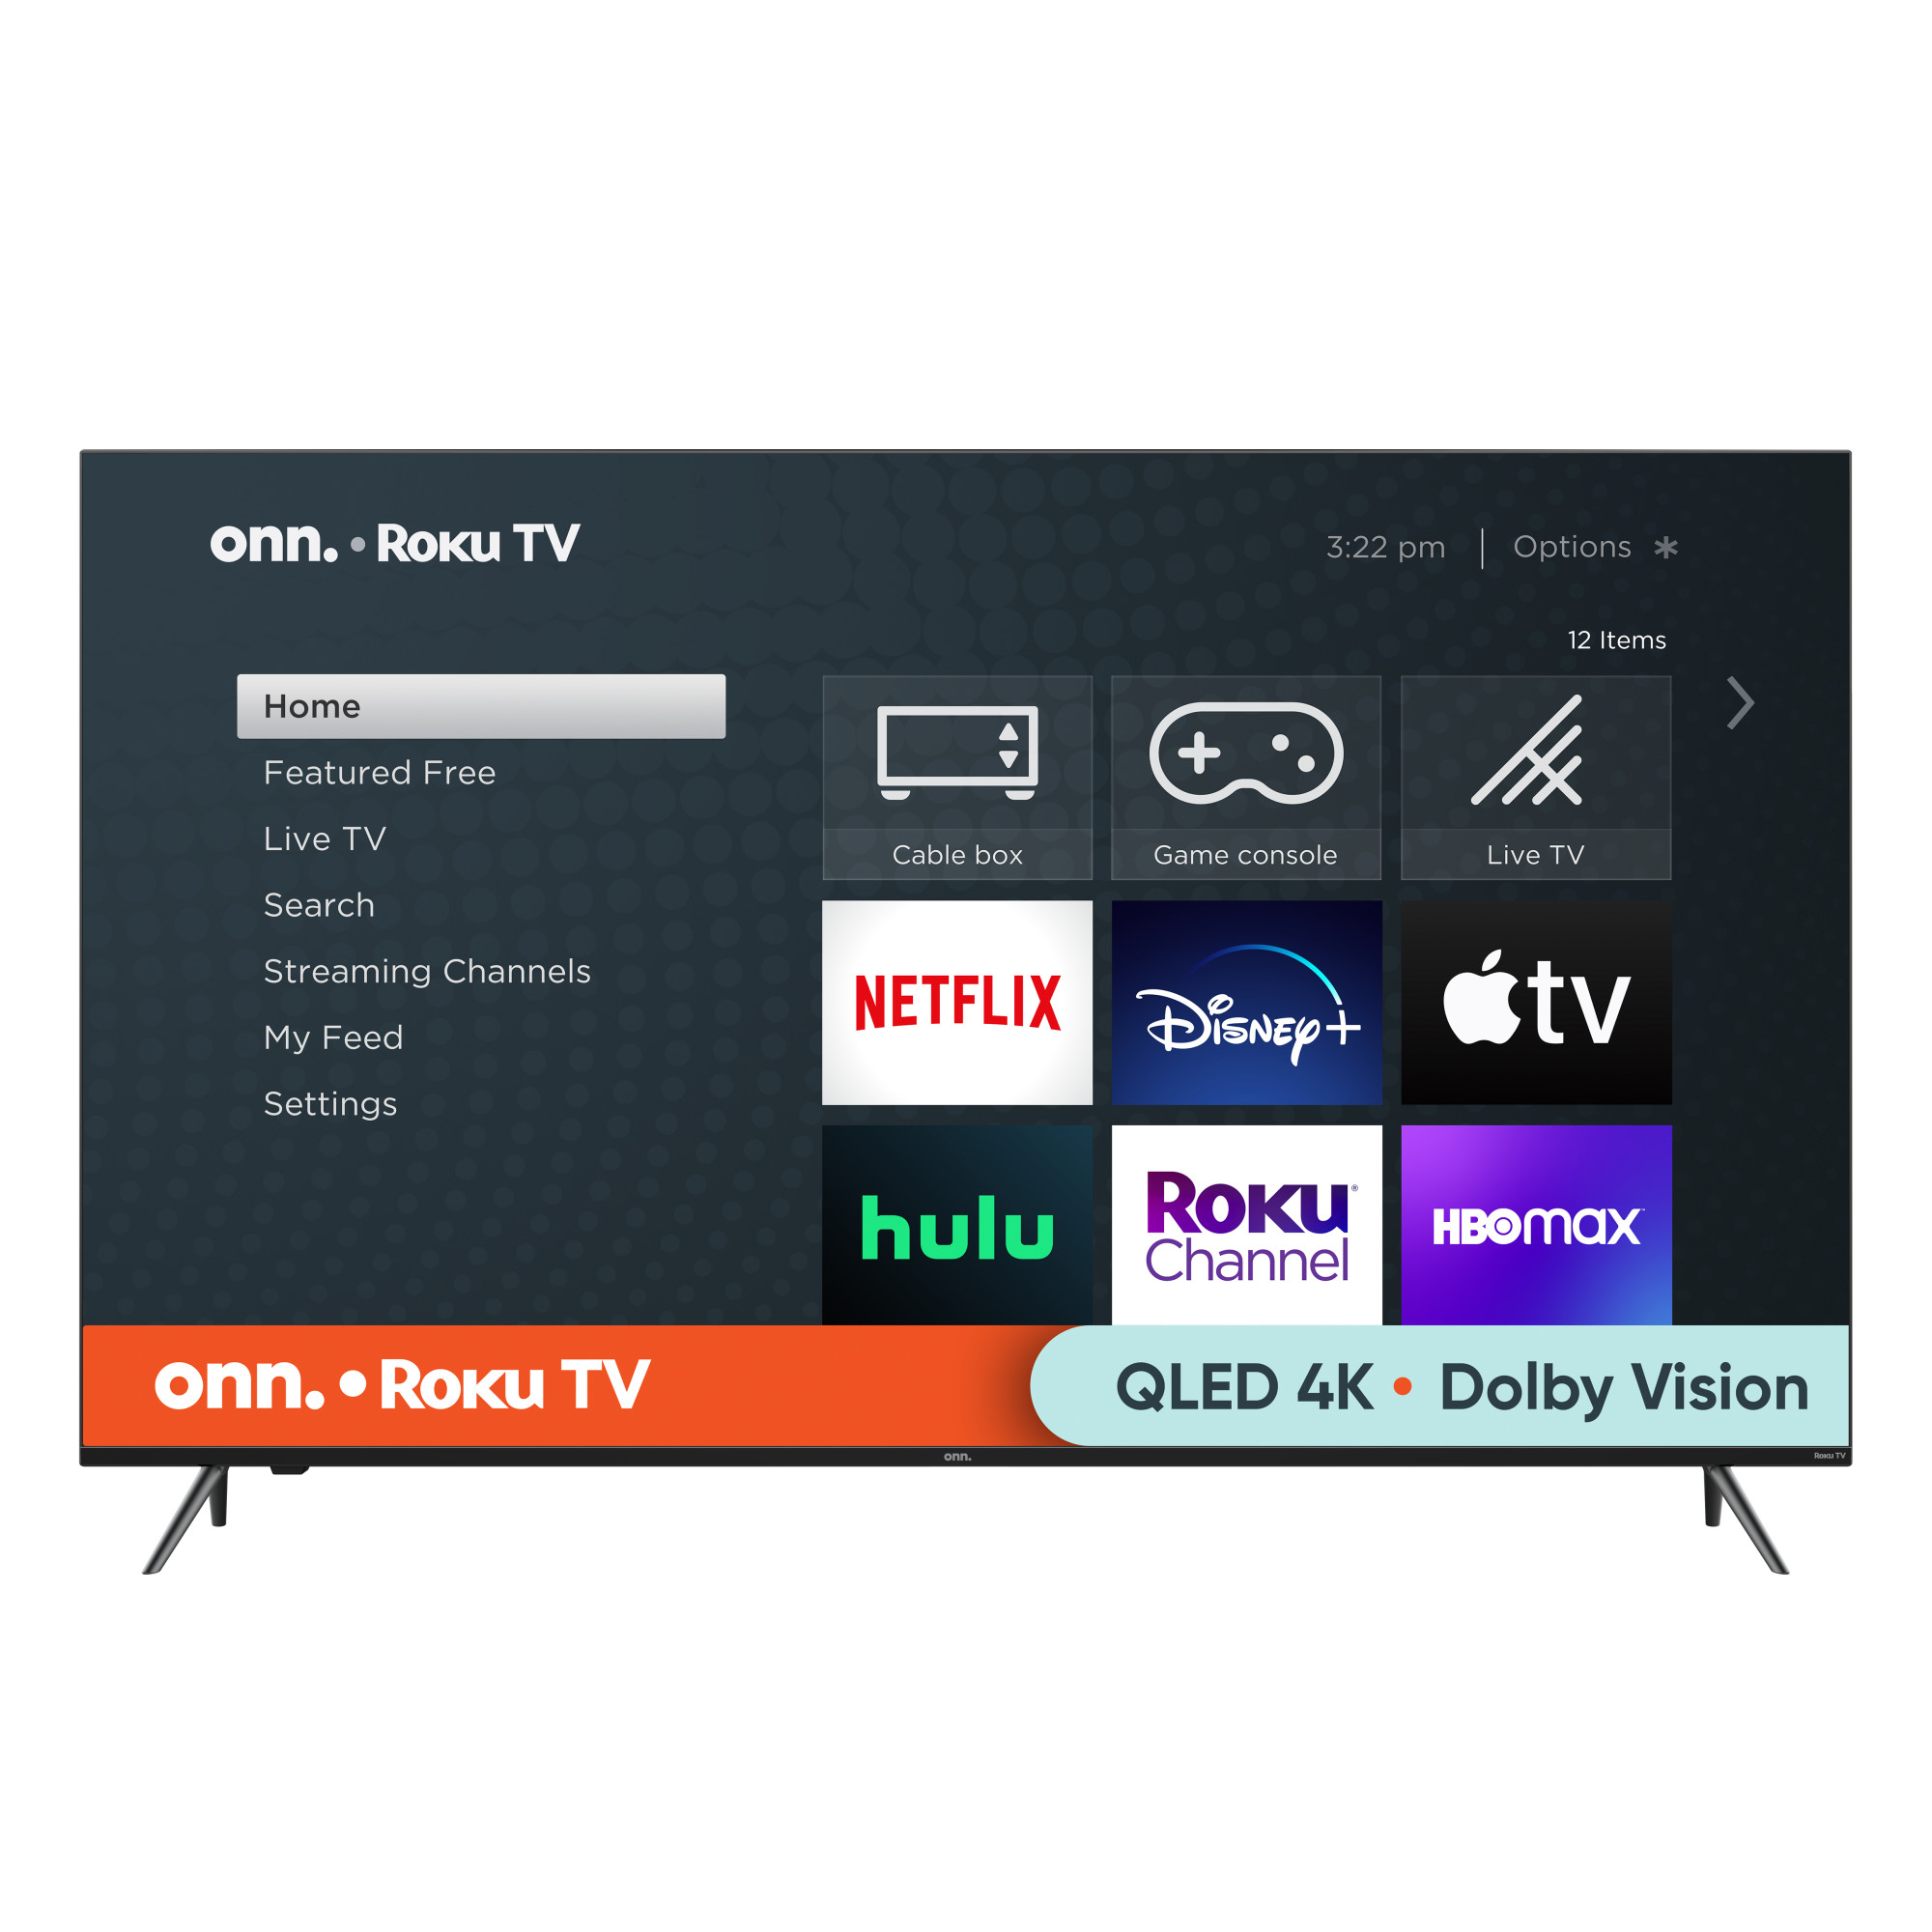 onn. 65” QLED 4K UHD (2160p) Roku Smart TV with Dolby Atmos, Dolby Vision, Local Dimming, 120hz Effective Refresh Rate, and HDR (100071705) - image 4 of 17